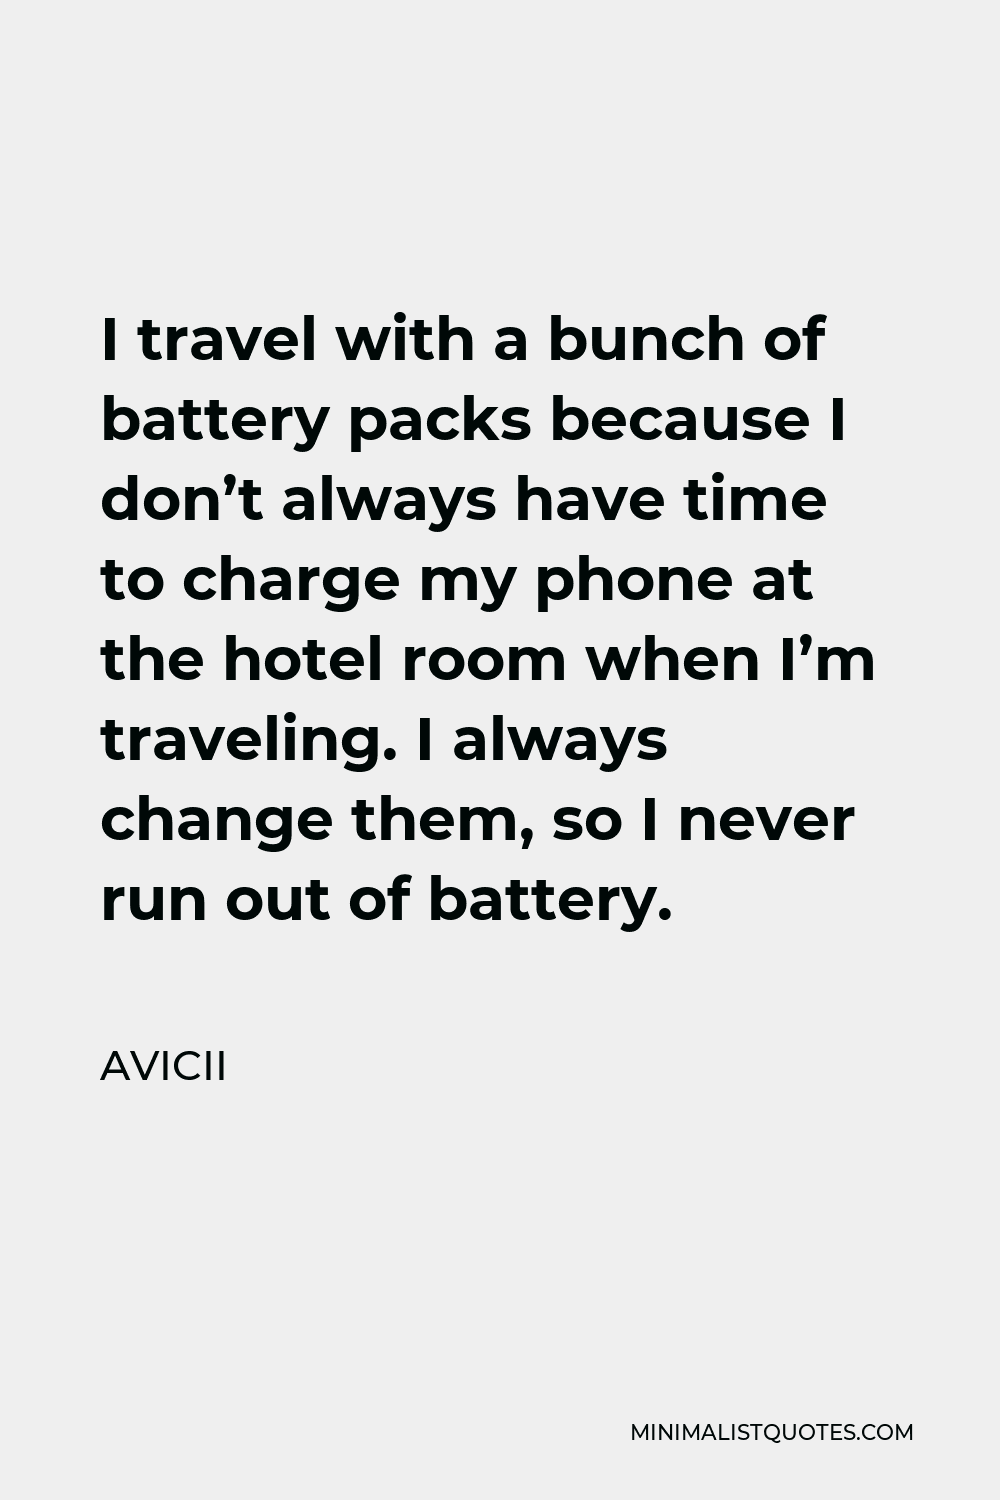 Avicii Quote - I travel with a bunch of battery packs because I don’t always have time to charge my phone at the hotel room when I’m traveling. I always change them, so I never run out of battery.